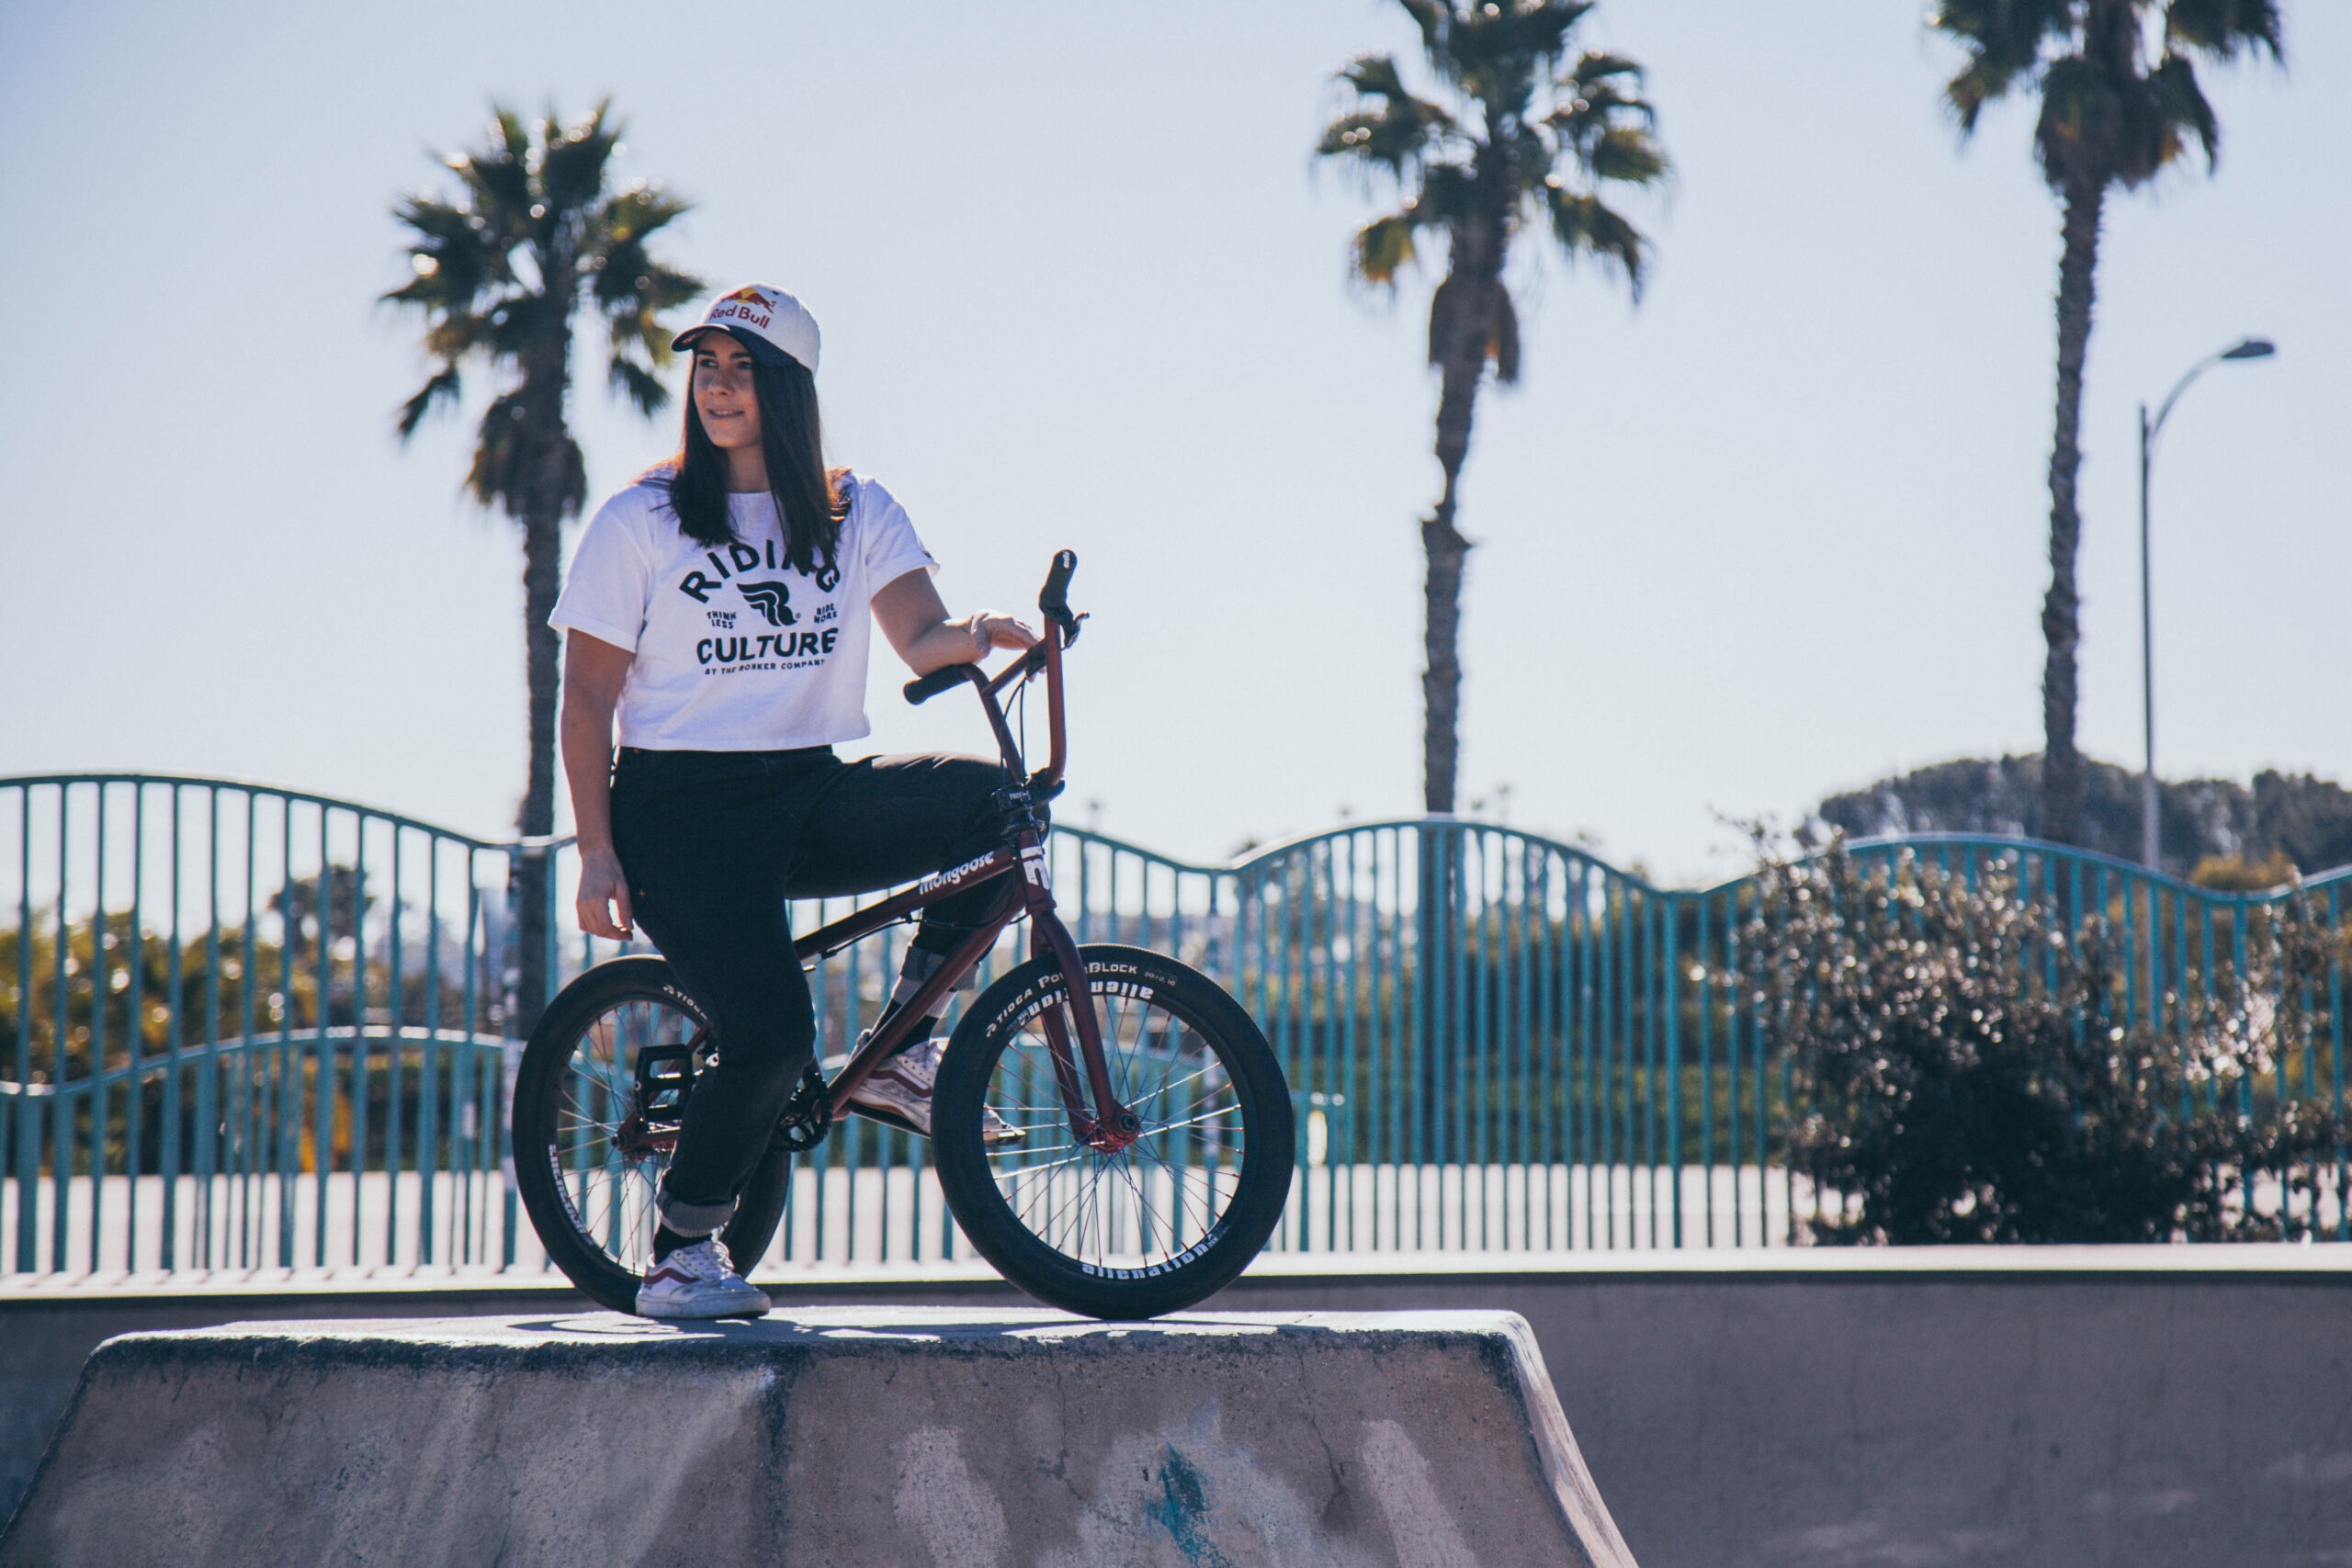 Taking on PUMA's FUTURE RIDER Play On with our custom BMX Bike - YOMZANSI.  Documenting THE CULTURE